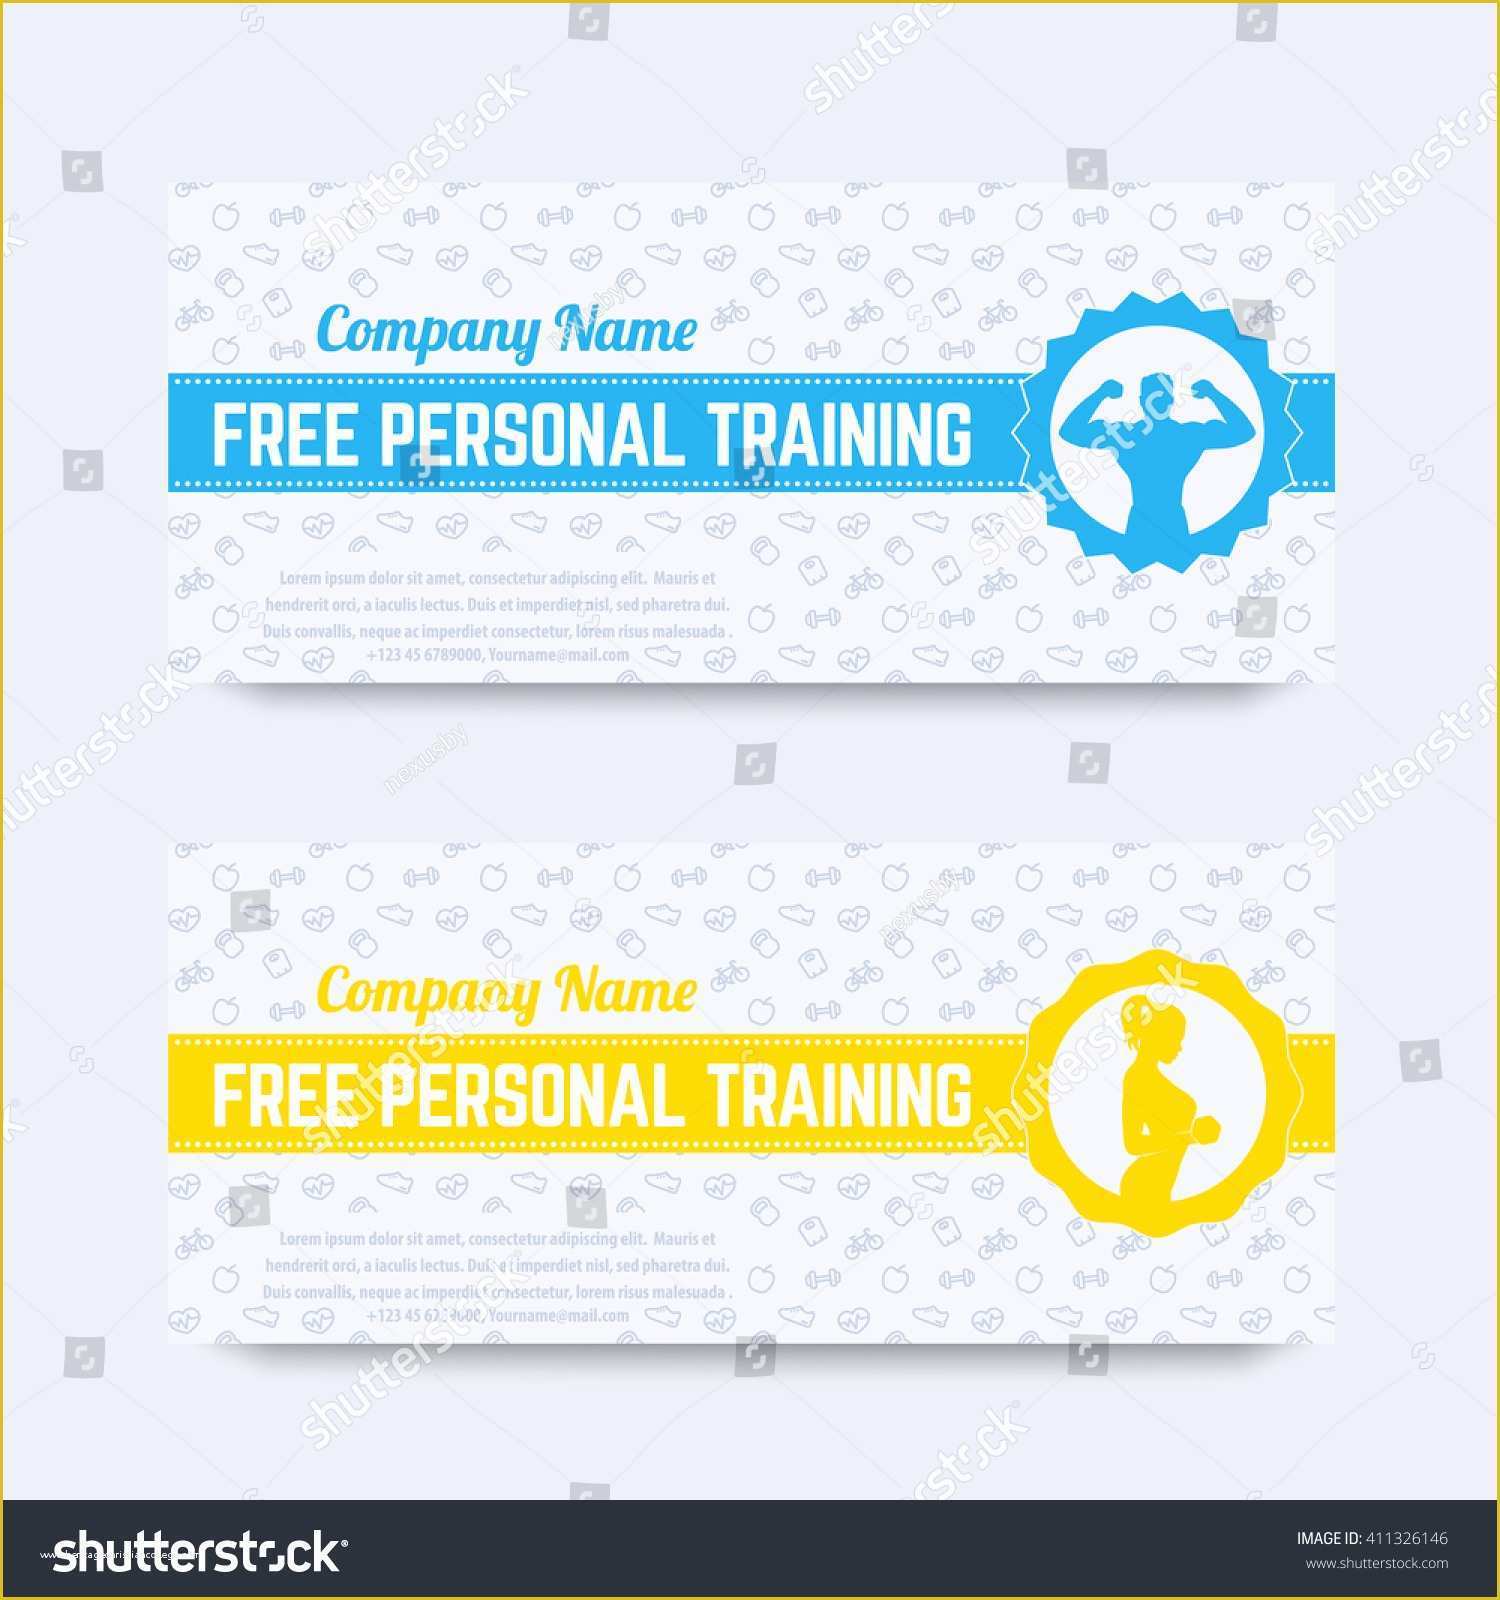 Free Personal Training Program Template Of Personal Training Gift Certificate Template